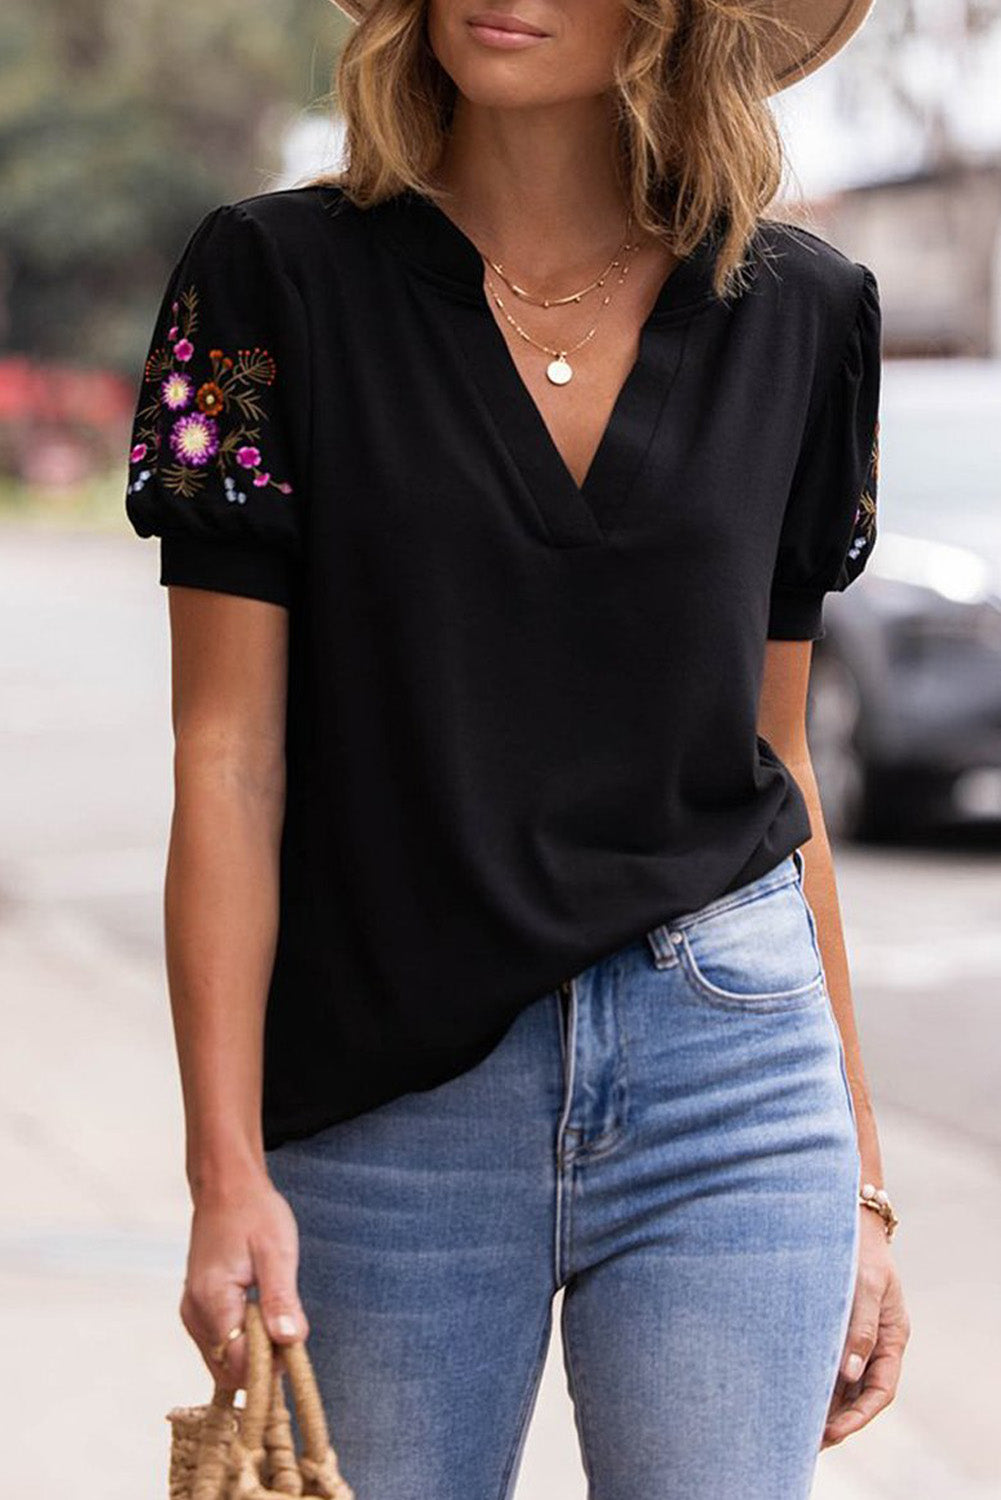 Black Floral Embroidered Sleeve Notch Neck Top